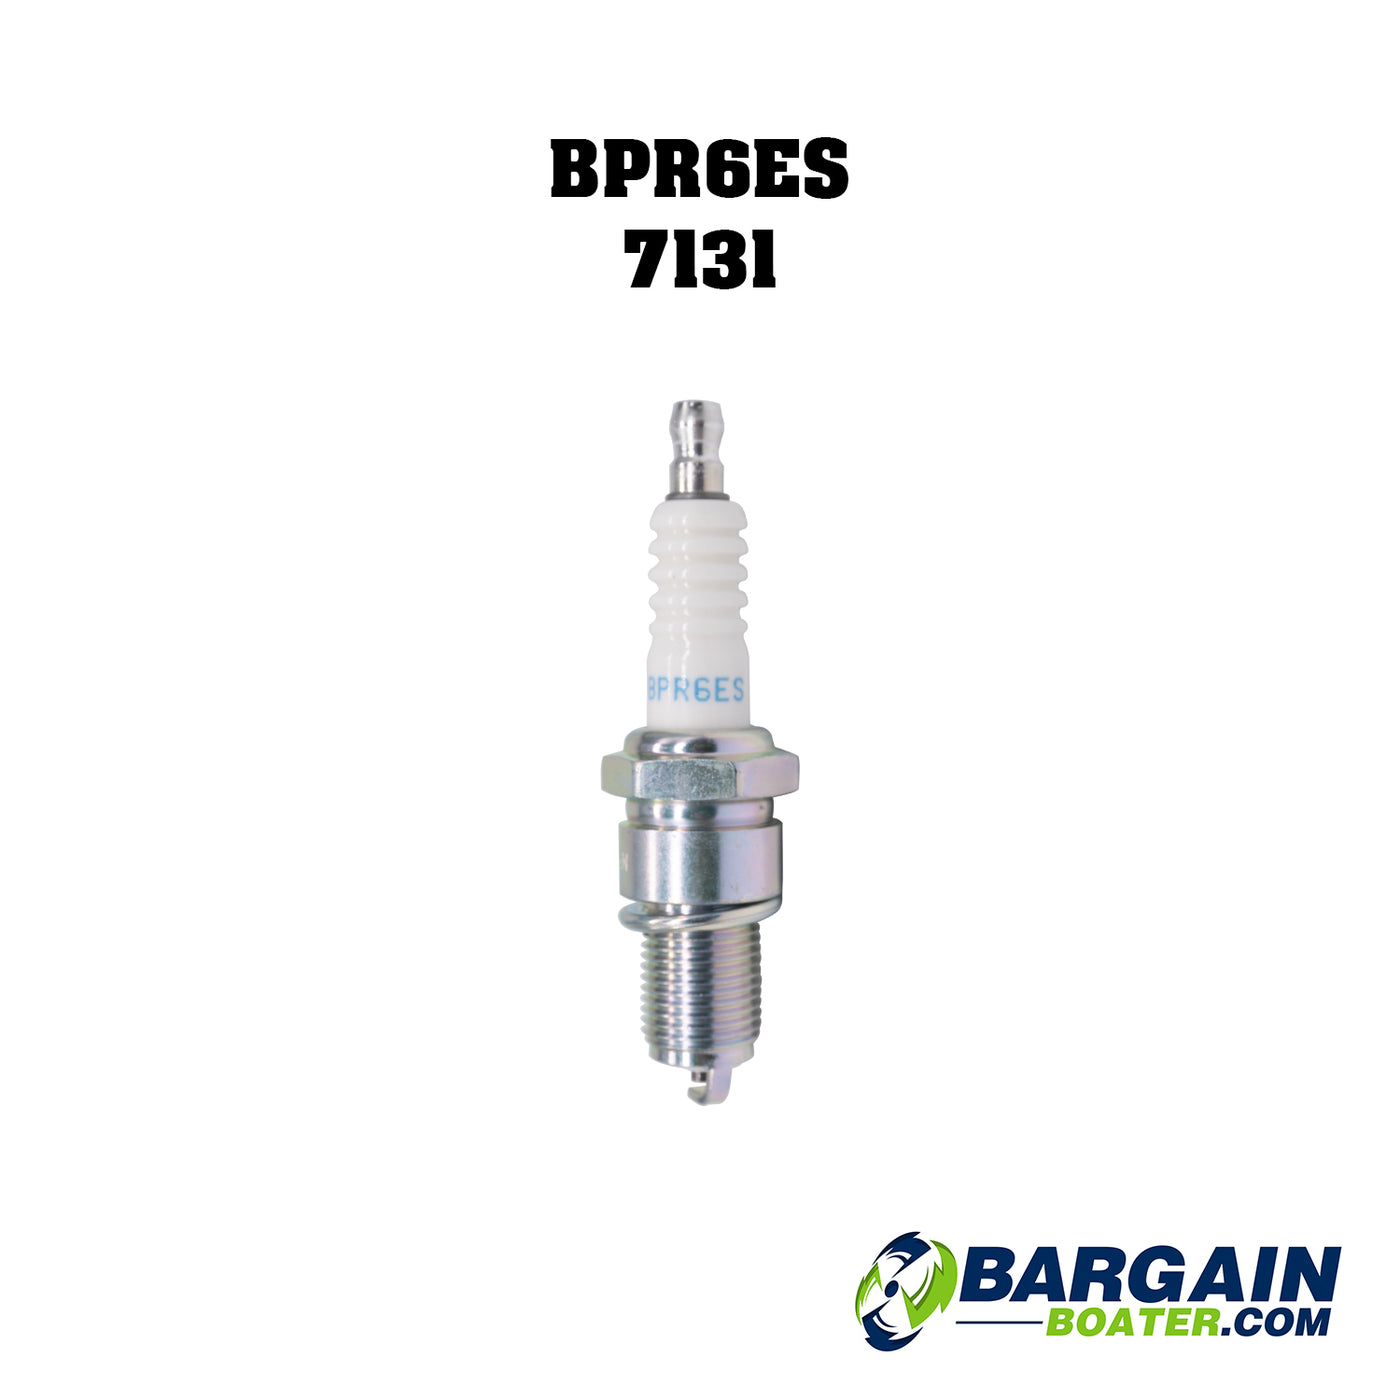 This is an NGK 7131 BPR6ES Spark Plug for Evinrude/Johnson 2-Stroke outboard motors (5030600).